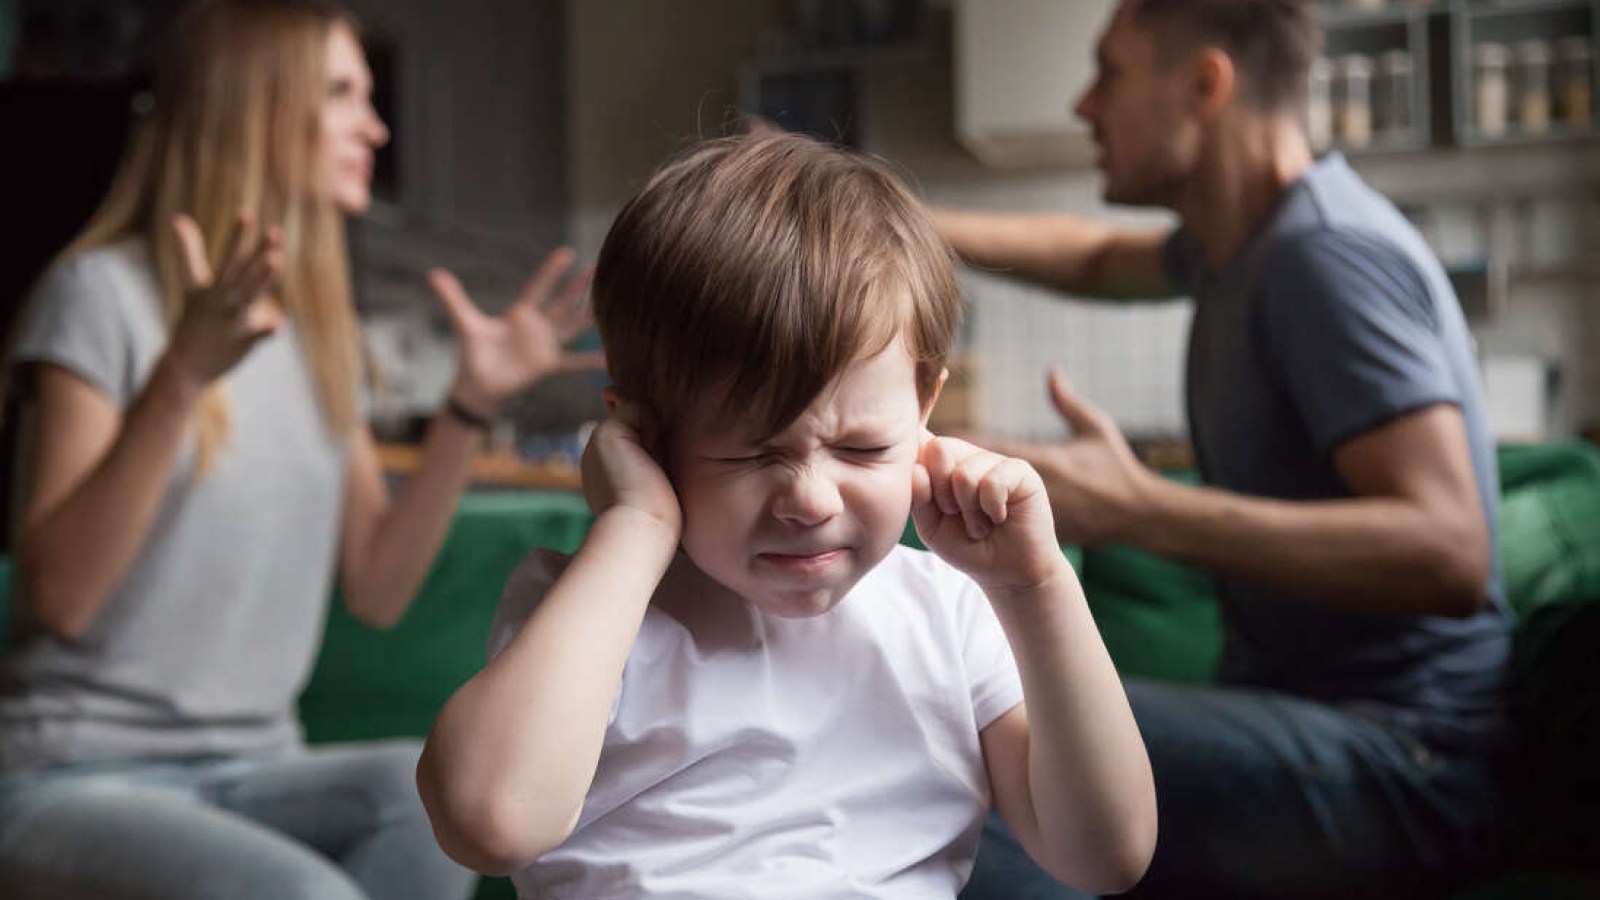 Frustrated kid son puts fingers in ears not listening to noisy parents arguing, stressed preschool boy suffering from mom and dad fighting shouting, family conflicts negative impact on child concept